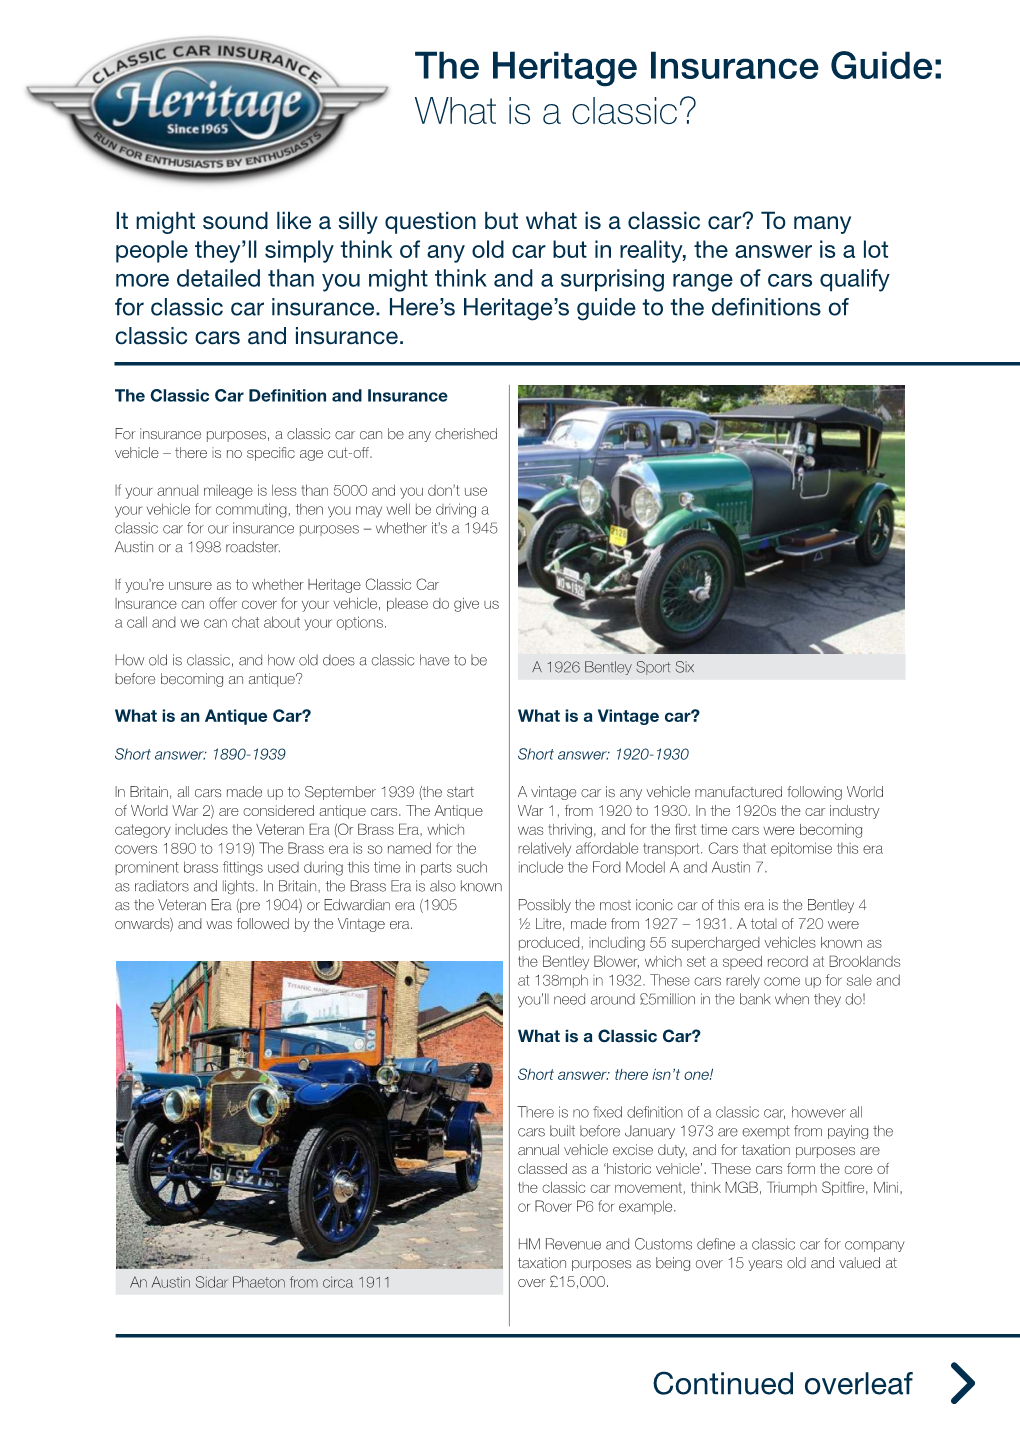 The Heritage Insurance Guide: What Is a Classic?